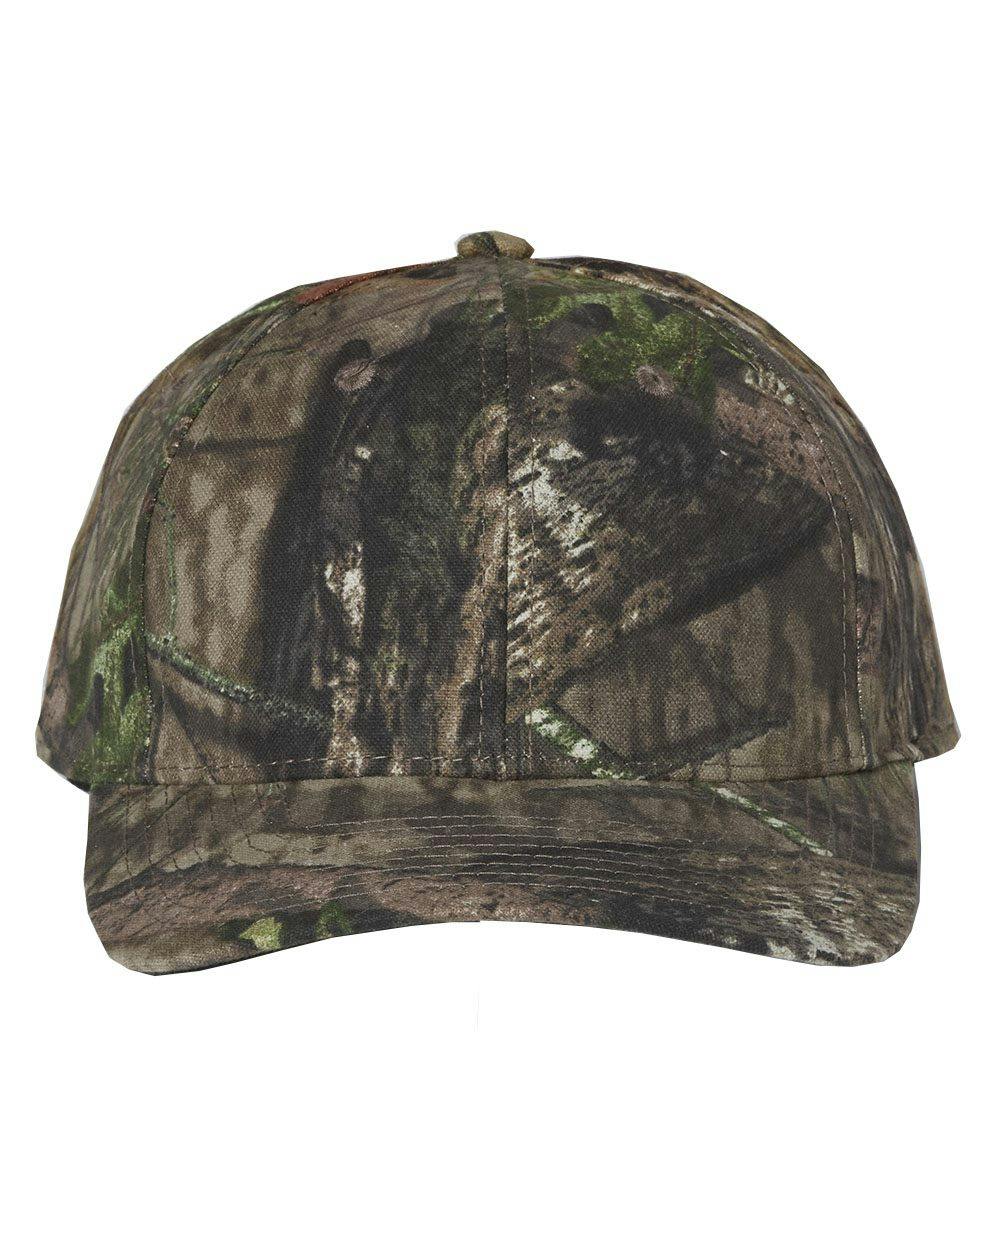 Image for Camo Cap - 301IS